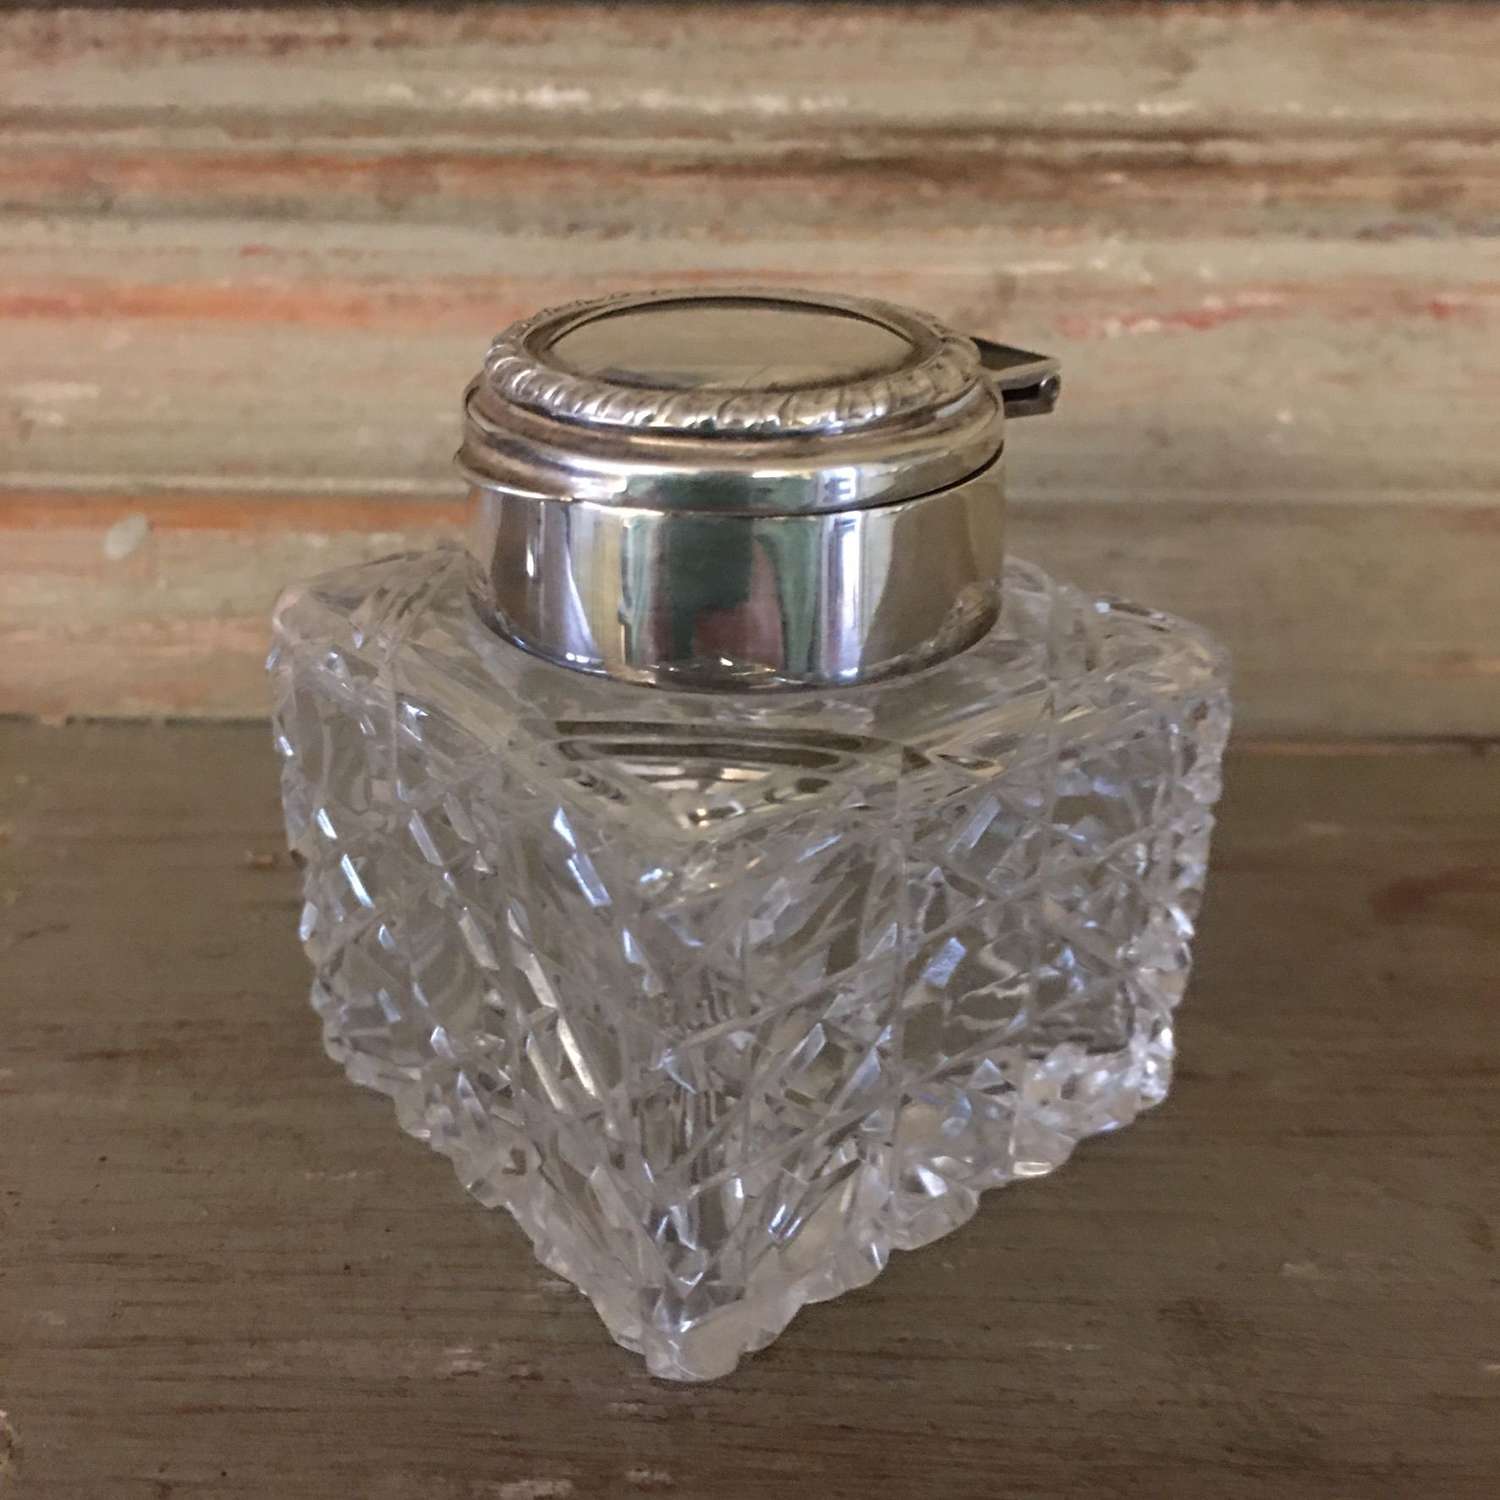 Barker Ellis Silver plated topped cut glass inkwell